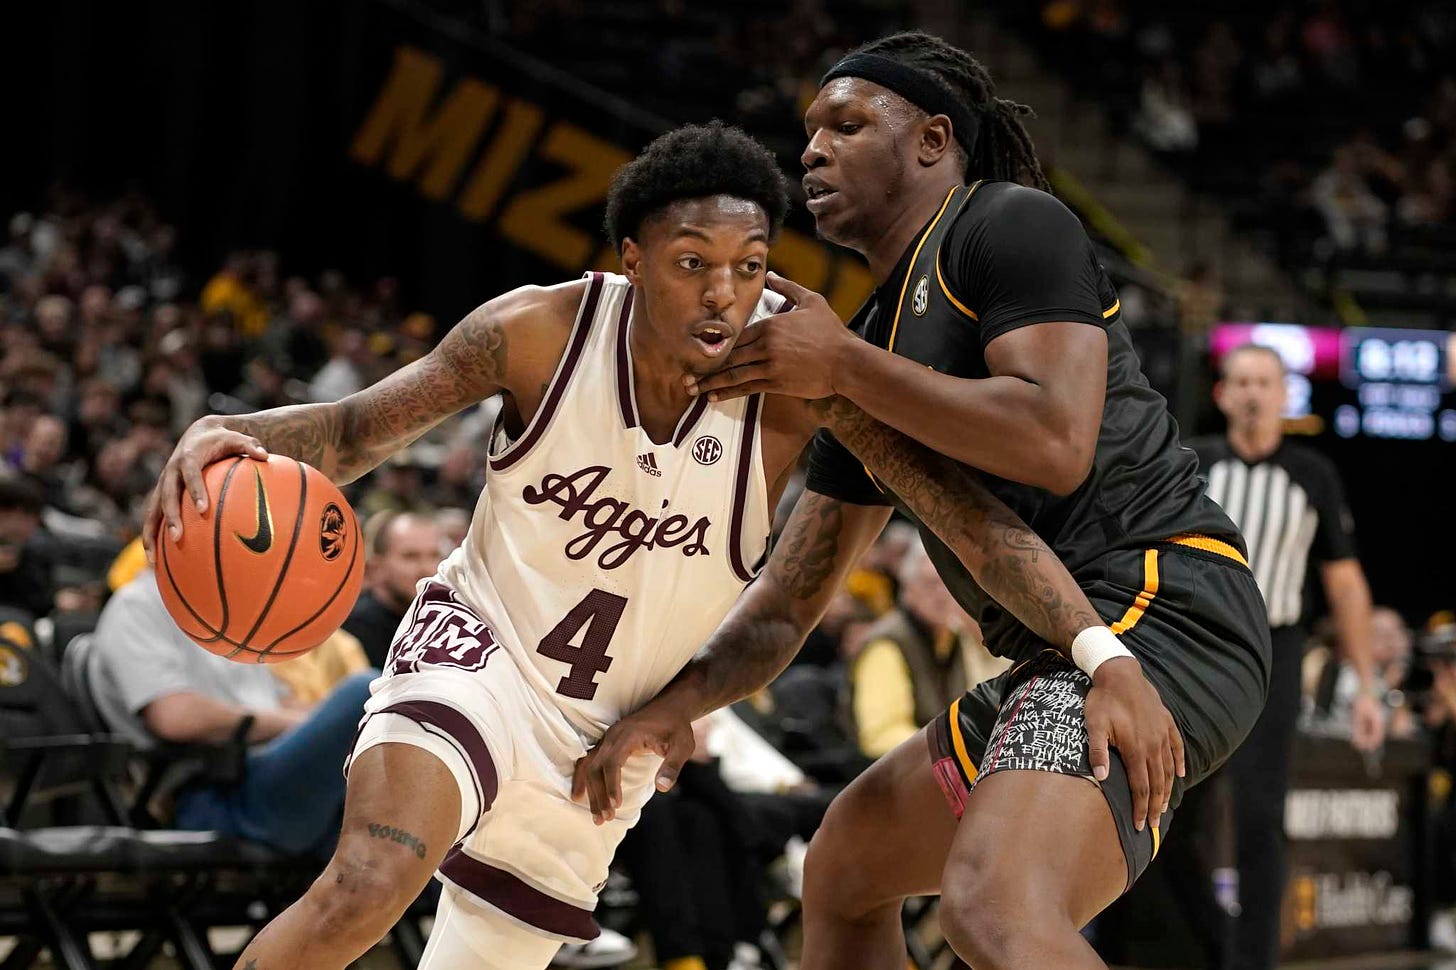 Texas A&M basketball: Aggies blow out Missouri for road win